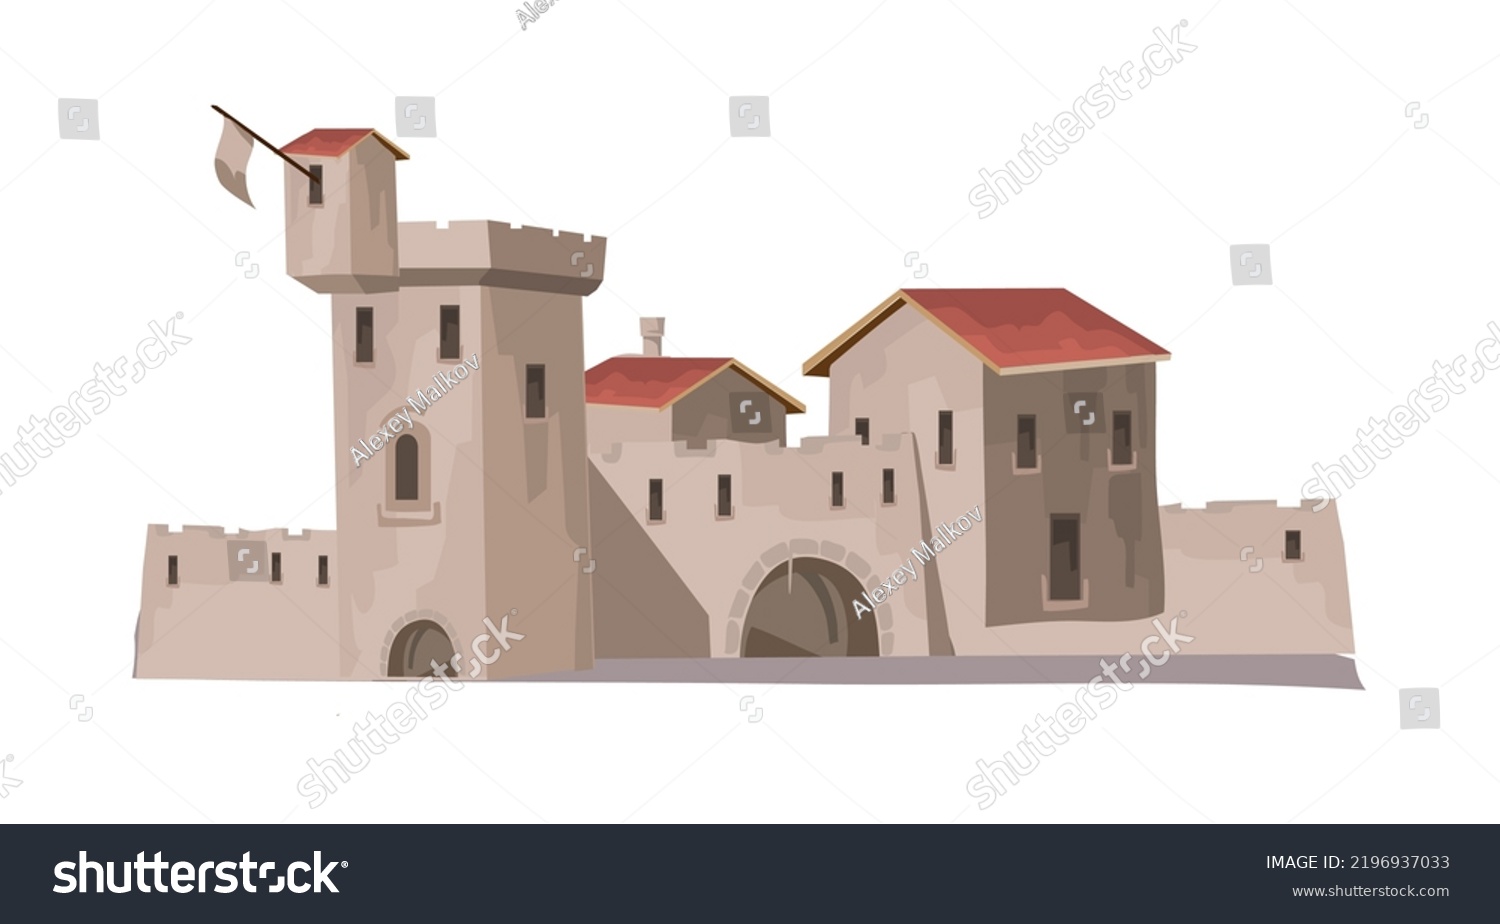 SVG of Vintage image with a beautiful old fortress, ancient castle Vector illustration for your ancient style design svg